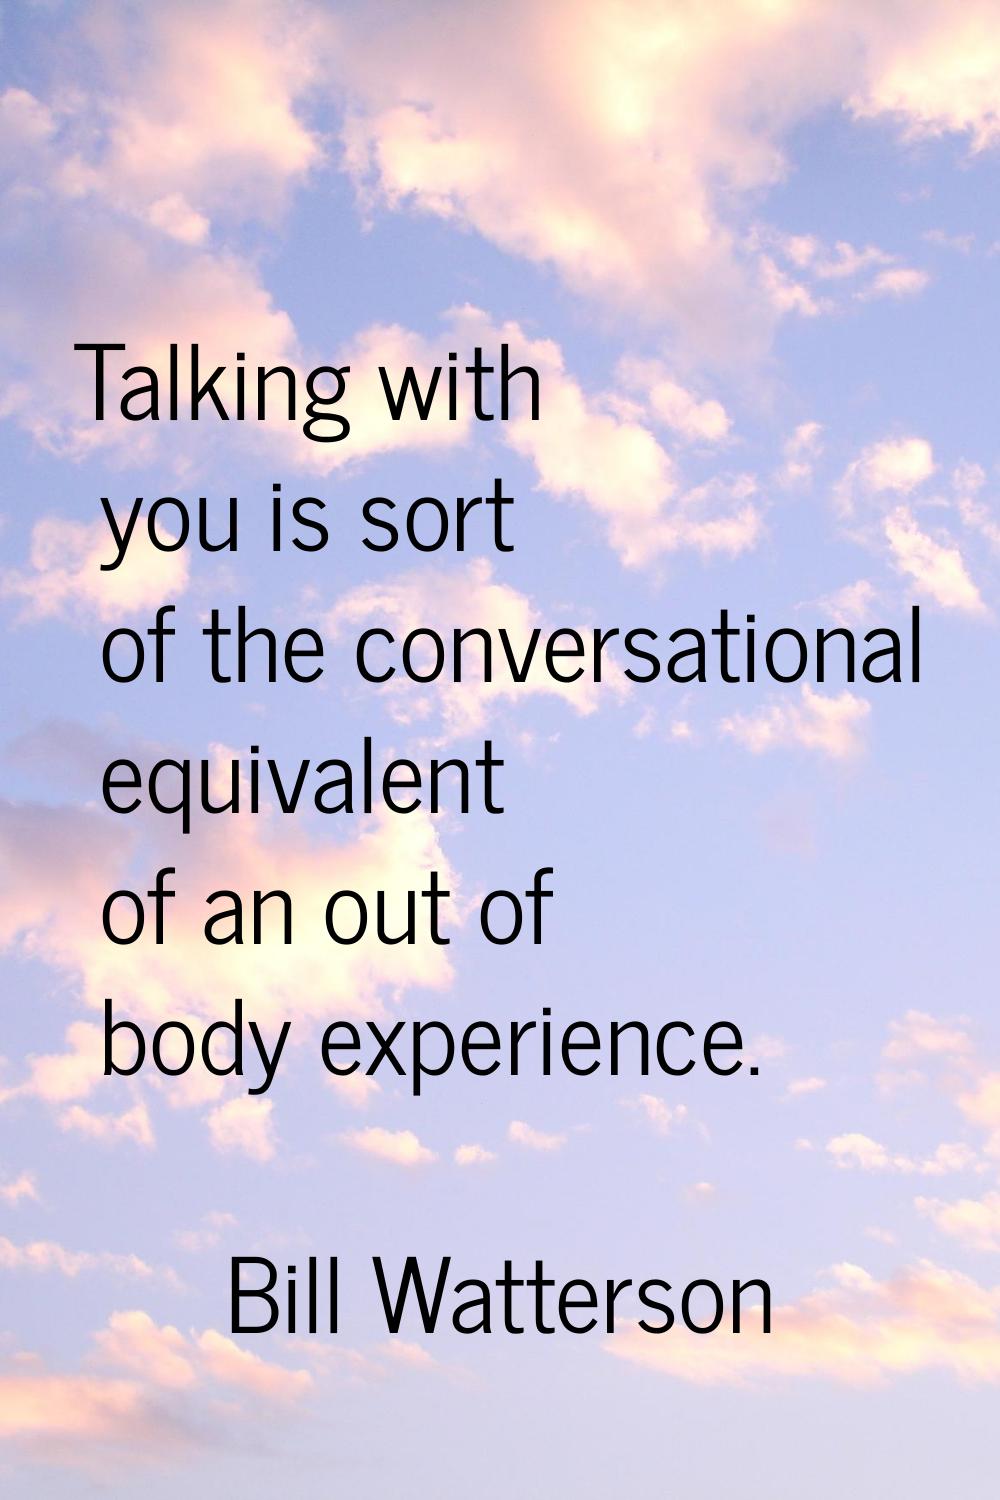 Talking with you is sort of the conversational equivalent of an out of body experience.